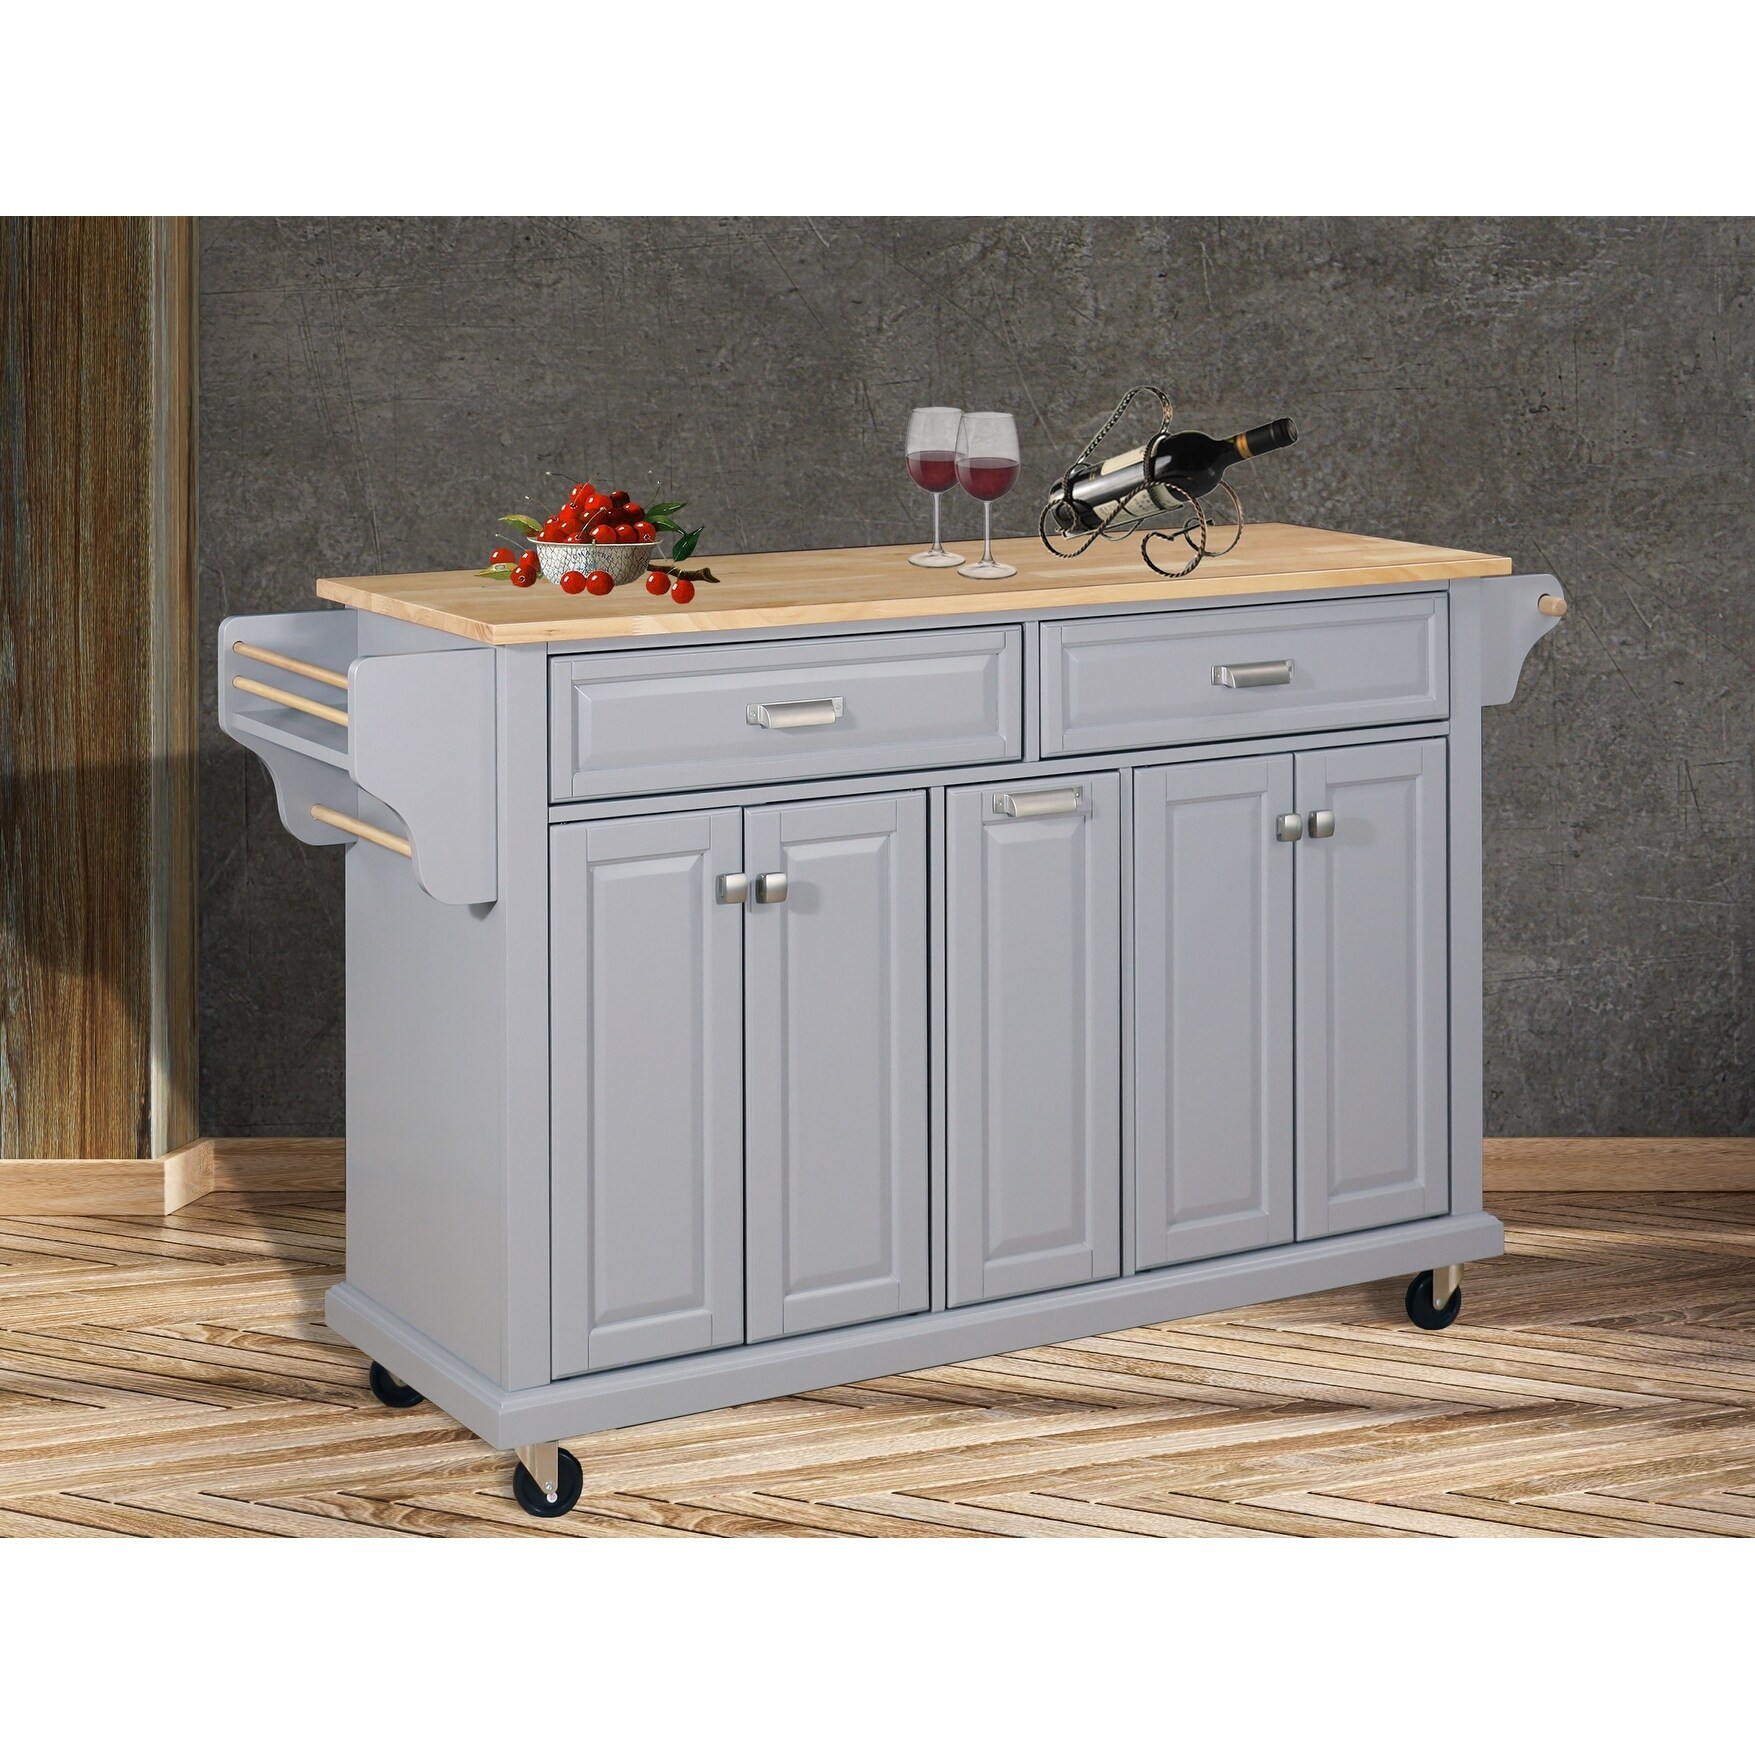 https://ak1.ostkcdn.com/images/products/is/images/direct/a4550363449213da5298238c1f2d0775e4133b28/Rolling-Kitchen-Island-Cart-with-2-Drawers%2C-Kitchen-Storage-Cabinet-on-Wheels-with-2-Doors-and-Inner-Adjustable-Shelves.jpg